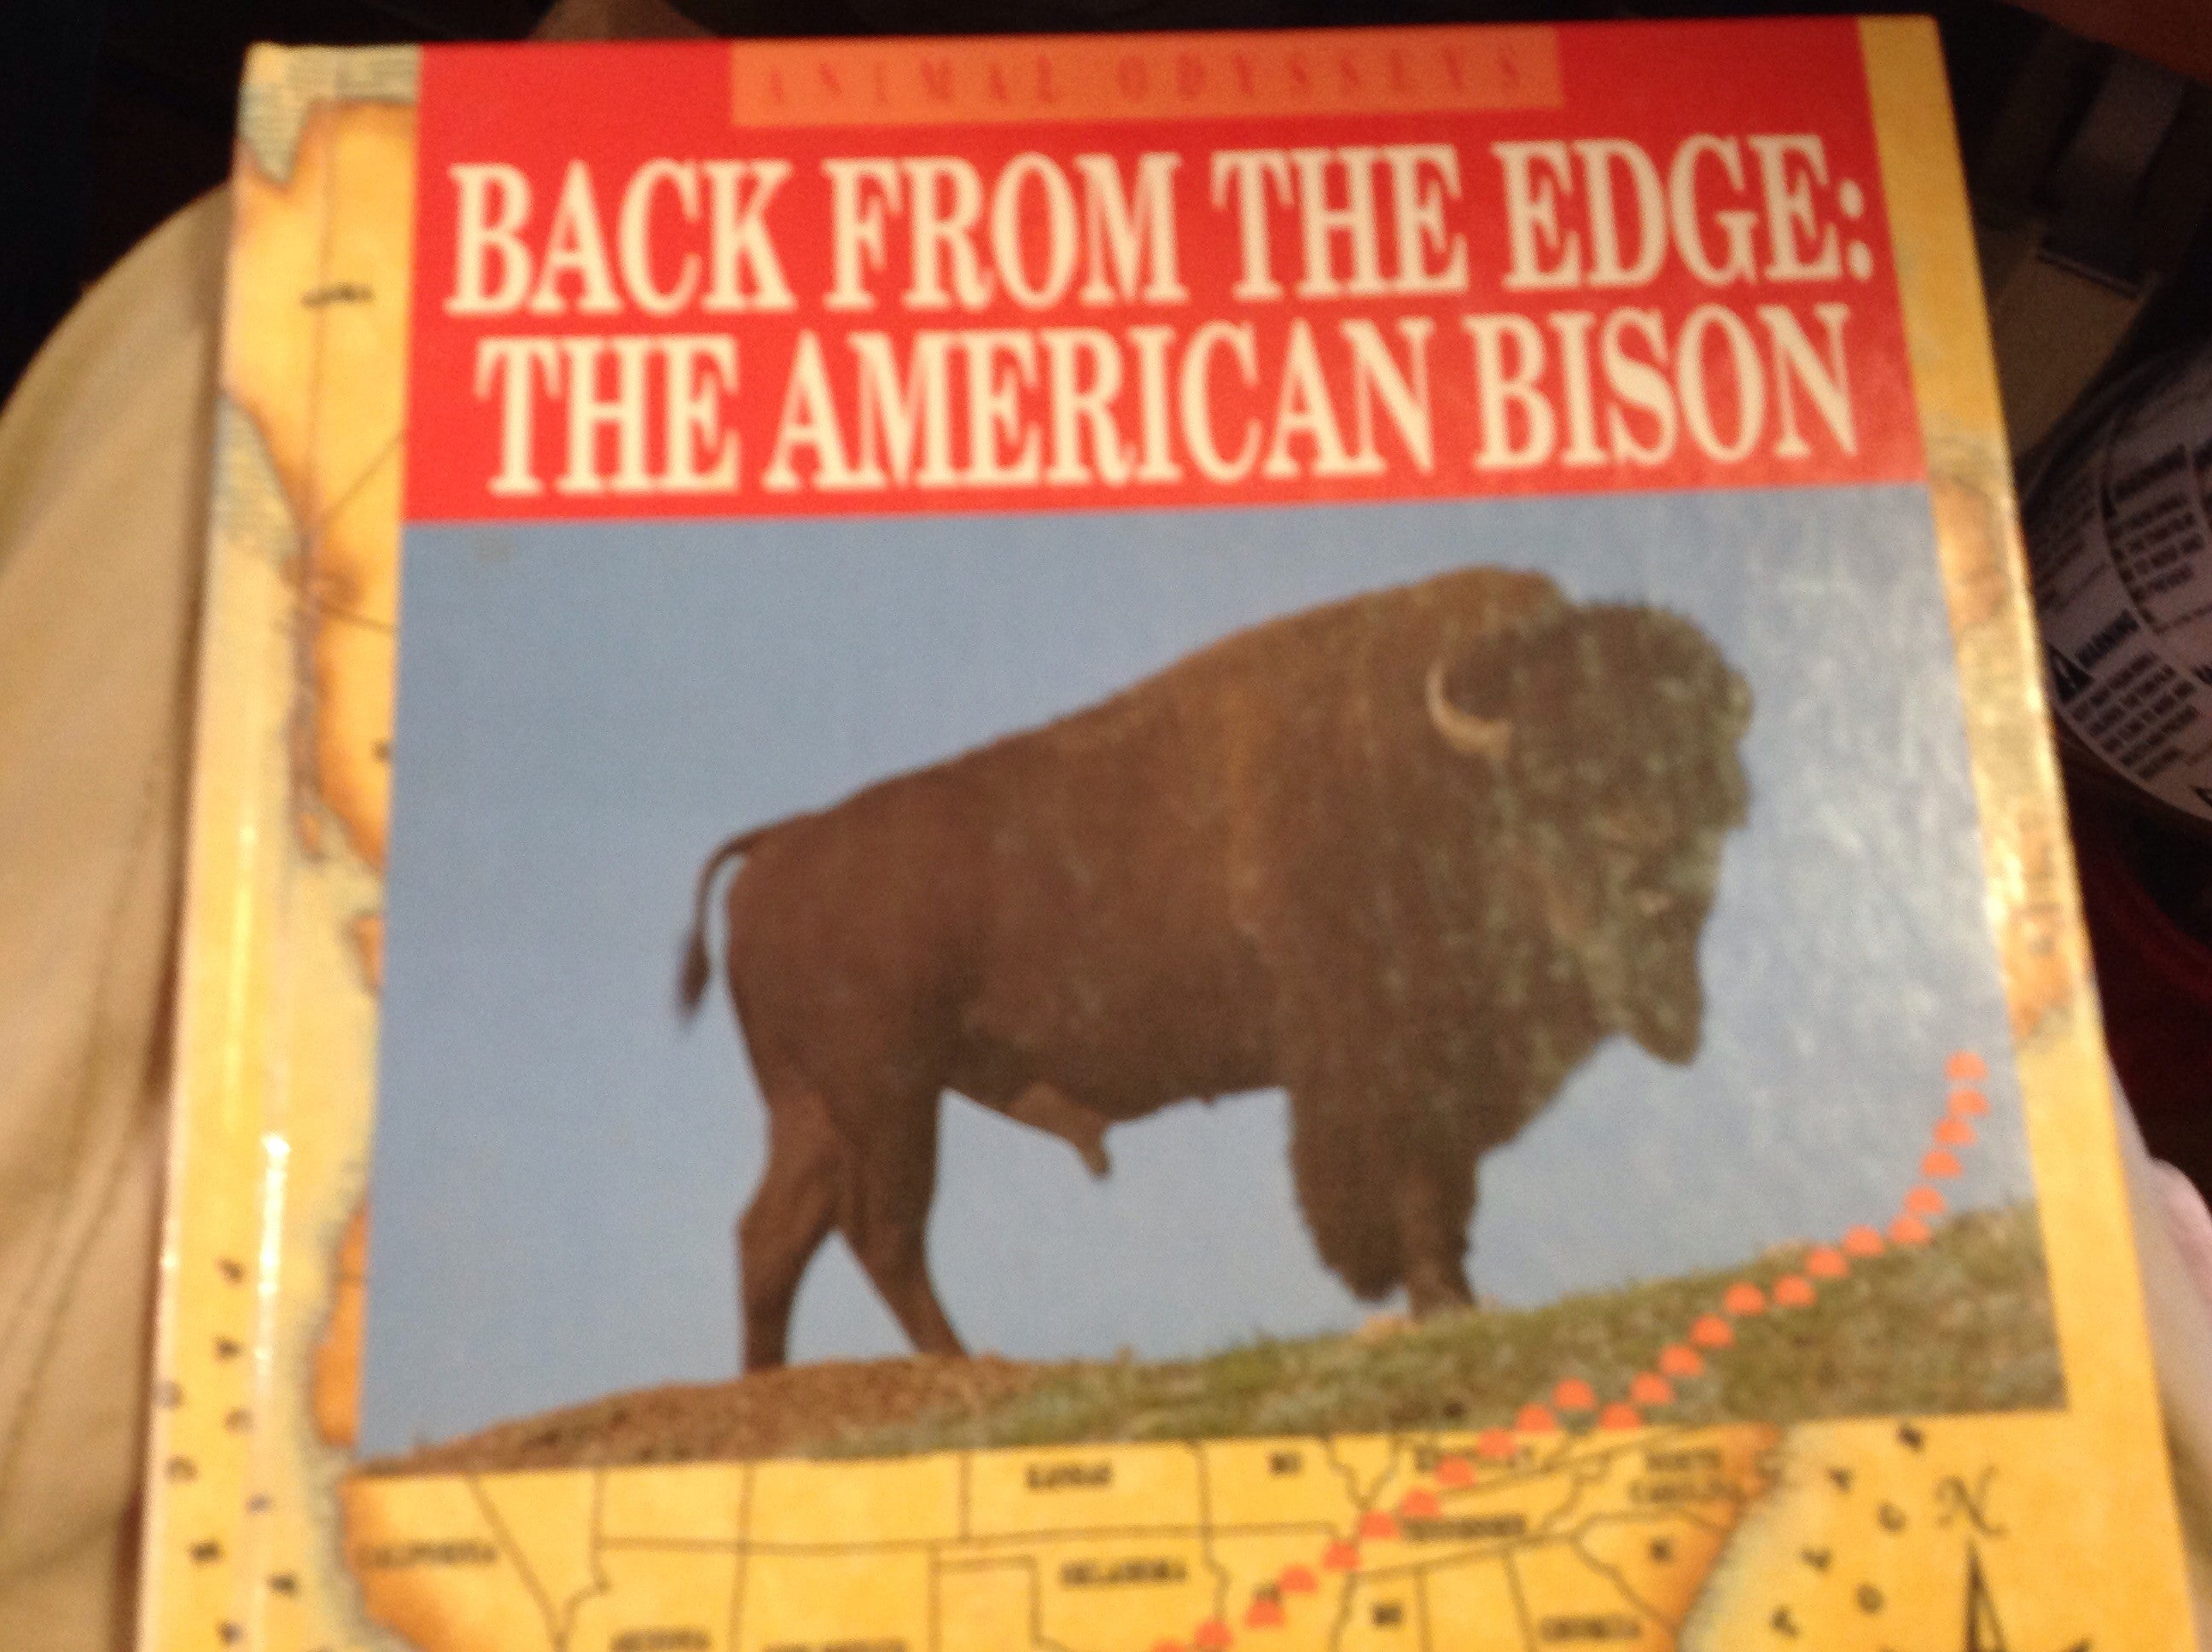 BOOKS - Back From The Edge: The American Bison